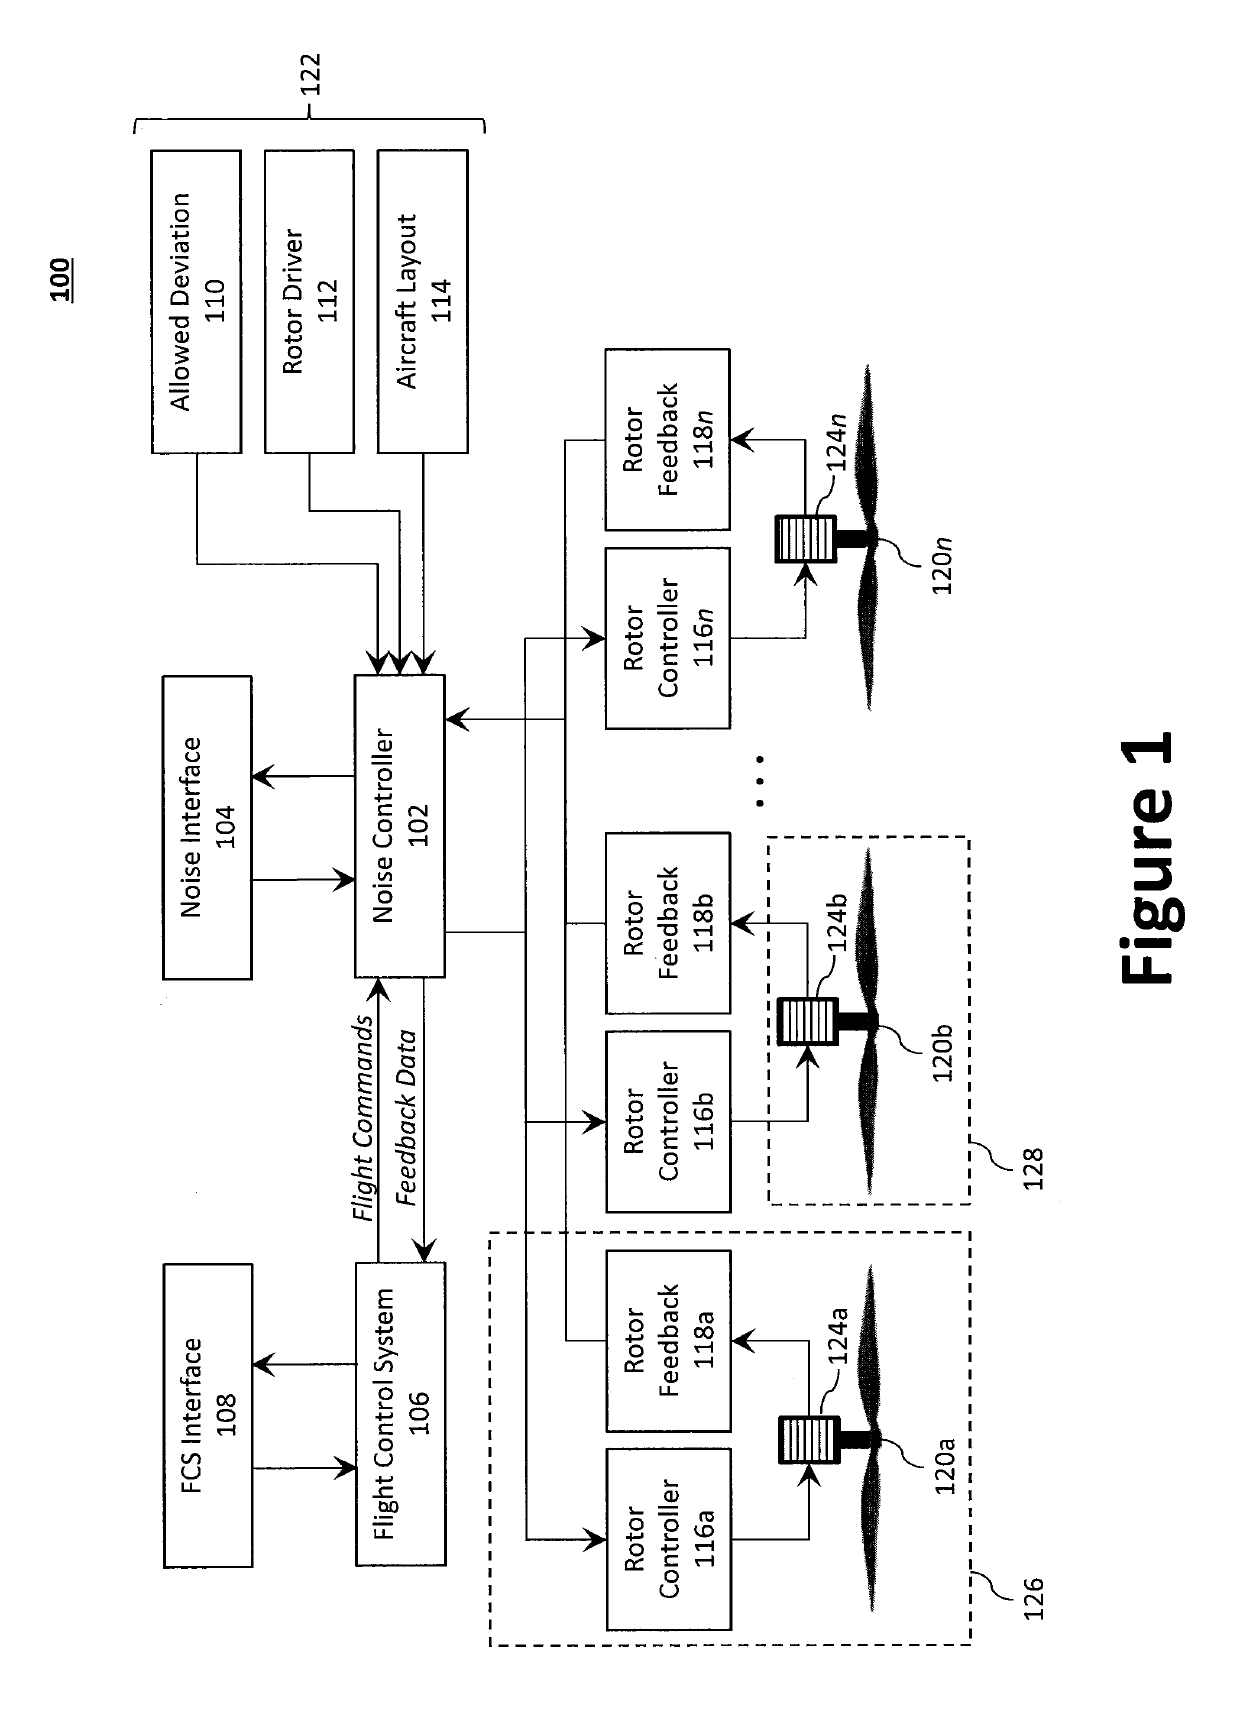 Systems and methods for acoustic radiation control